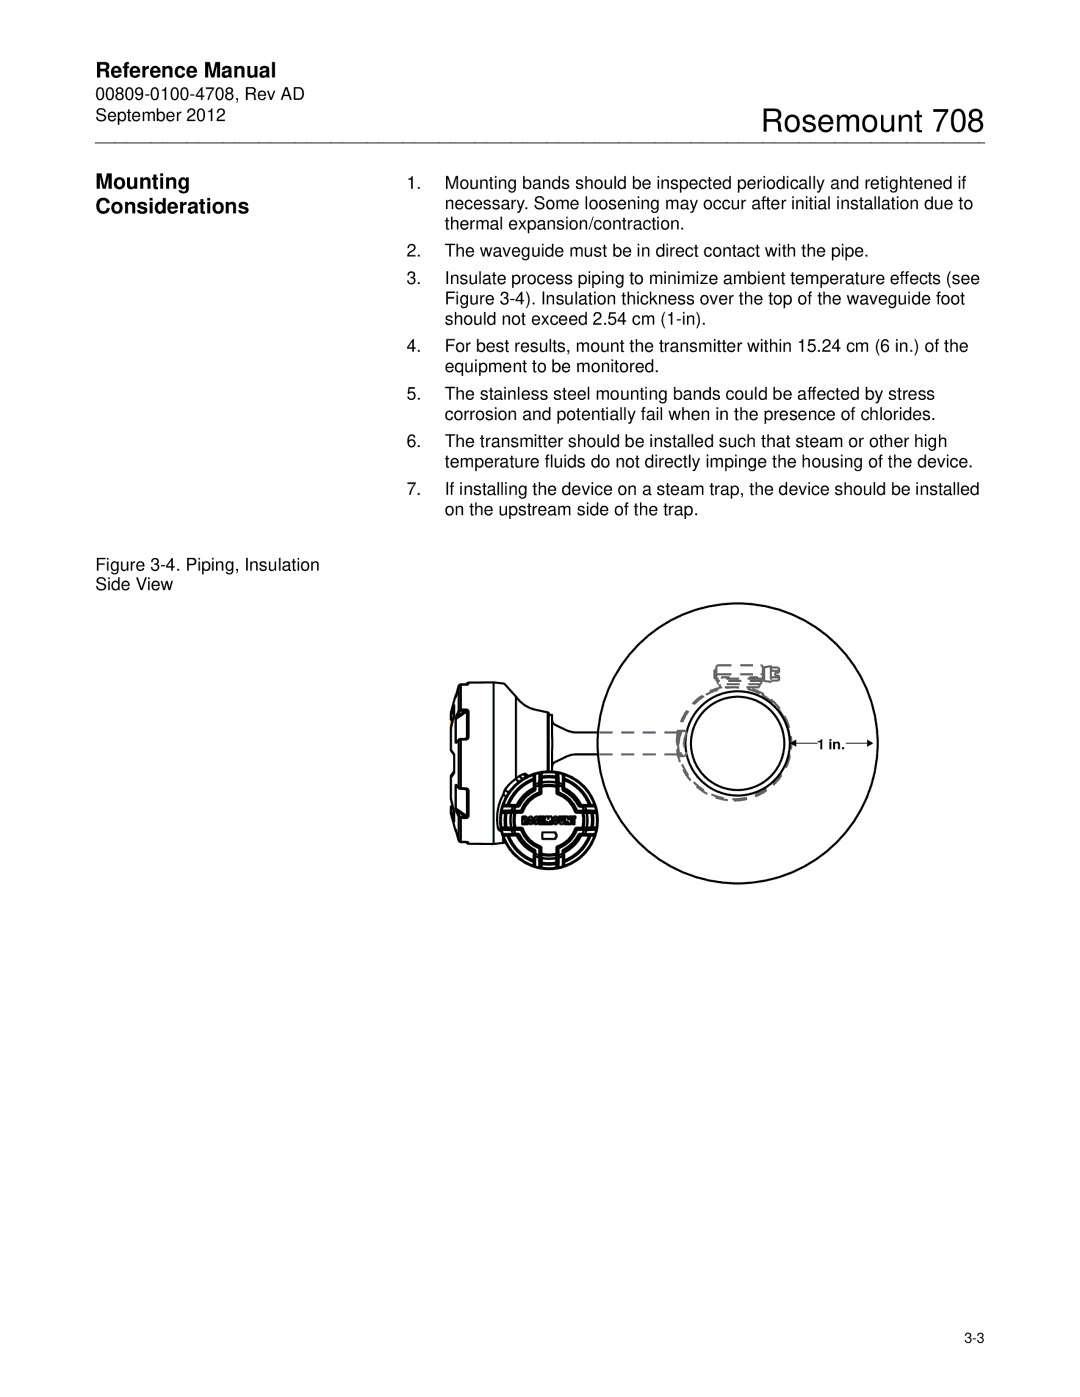 Emerson 708 manual Mounting Considerations, Piping, Insulation Side View 